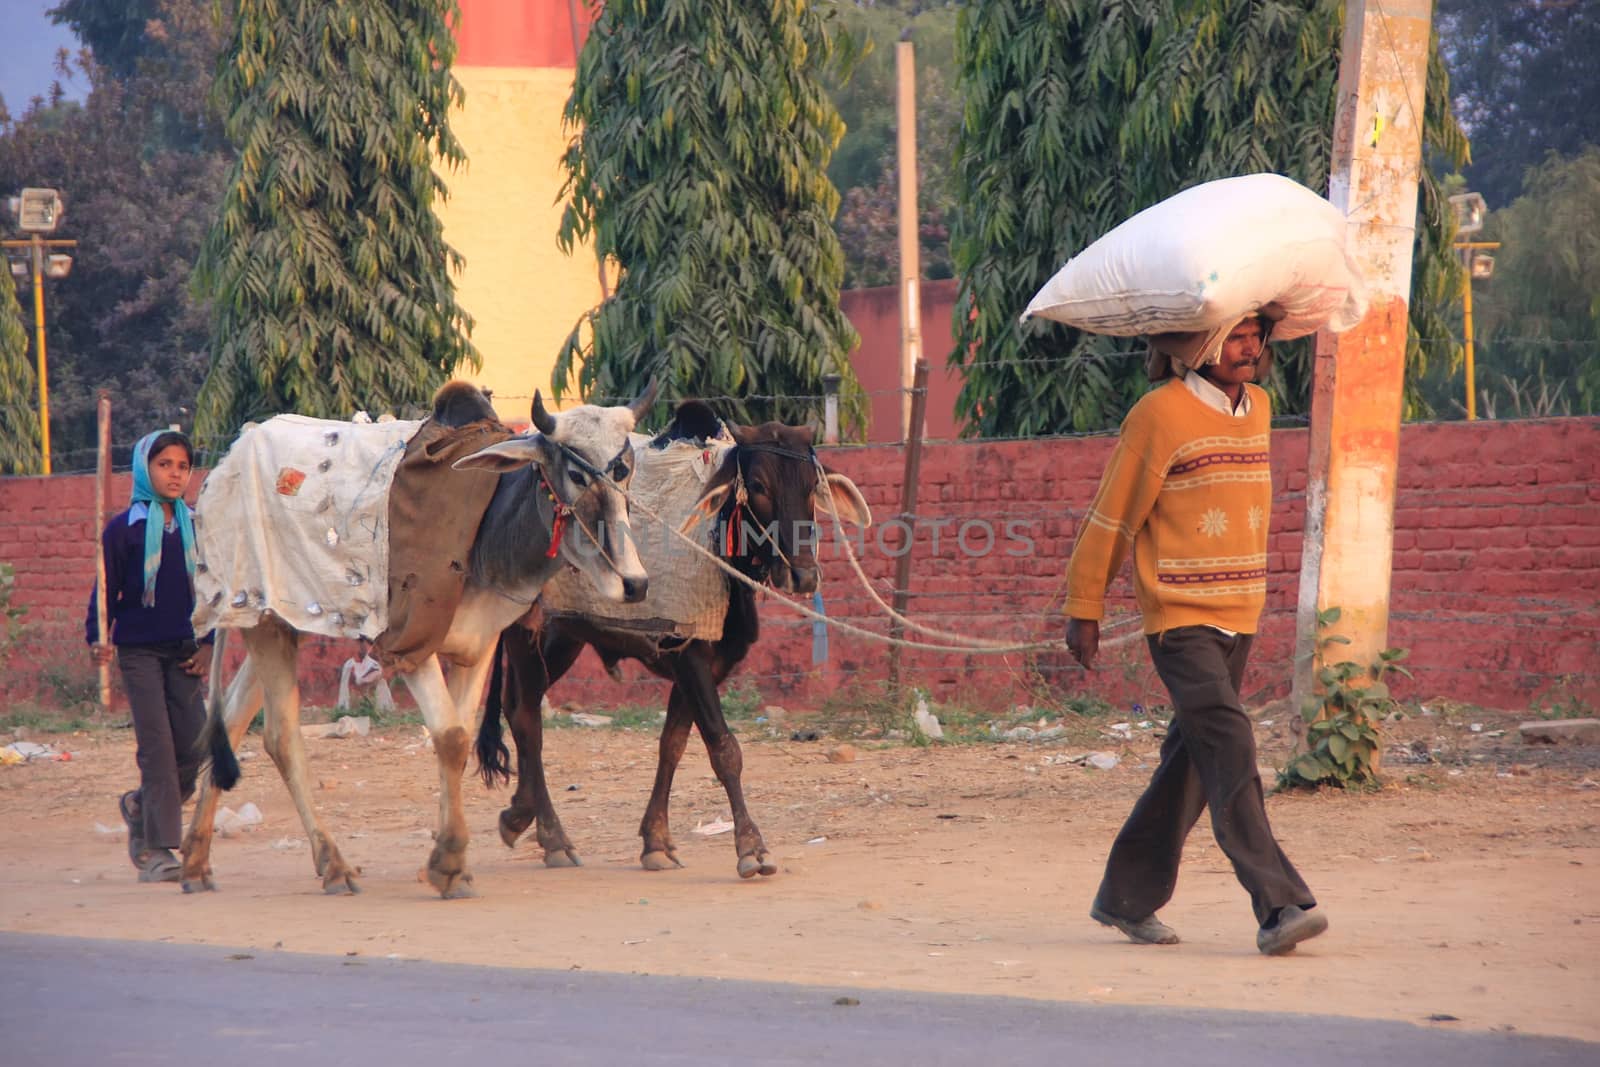 Father and daughter going along the road with cows, Sawai Madhop by donya_nedomam